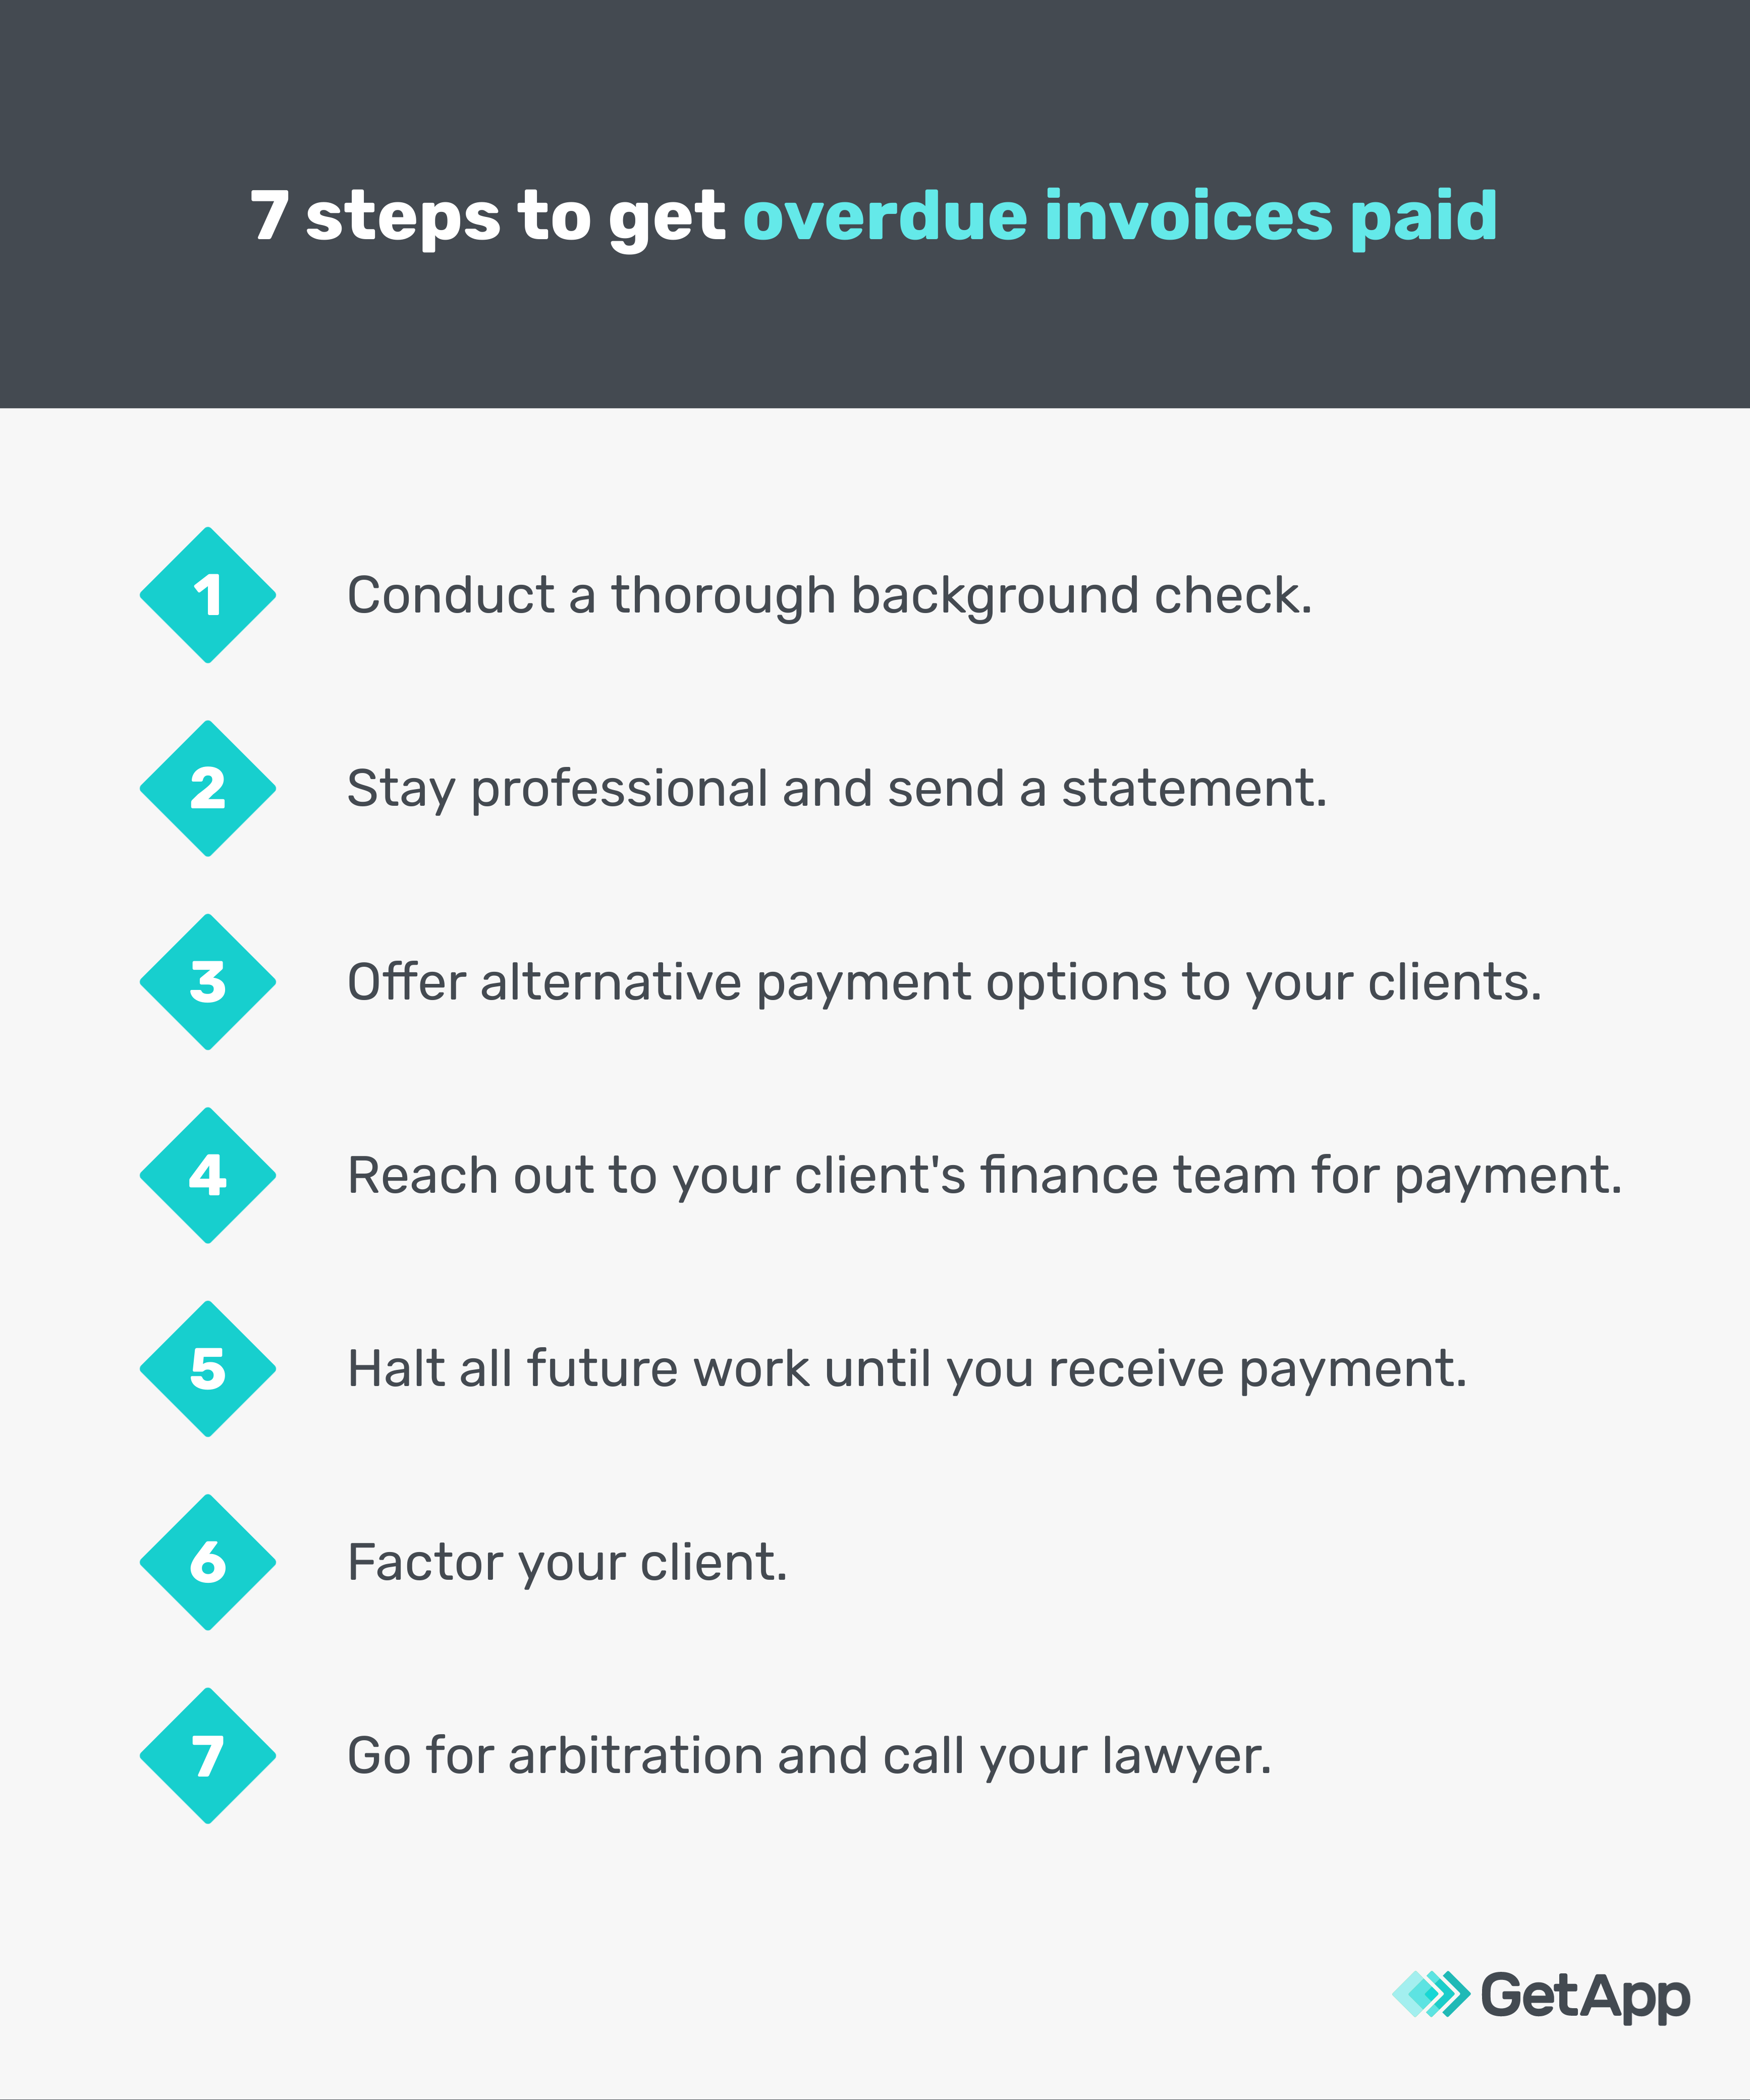 When Should You Follow Up On An Invoice: 8 Most Effective Payment Tricks